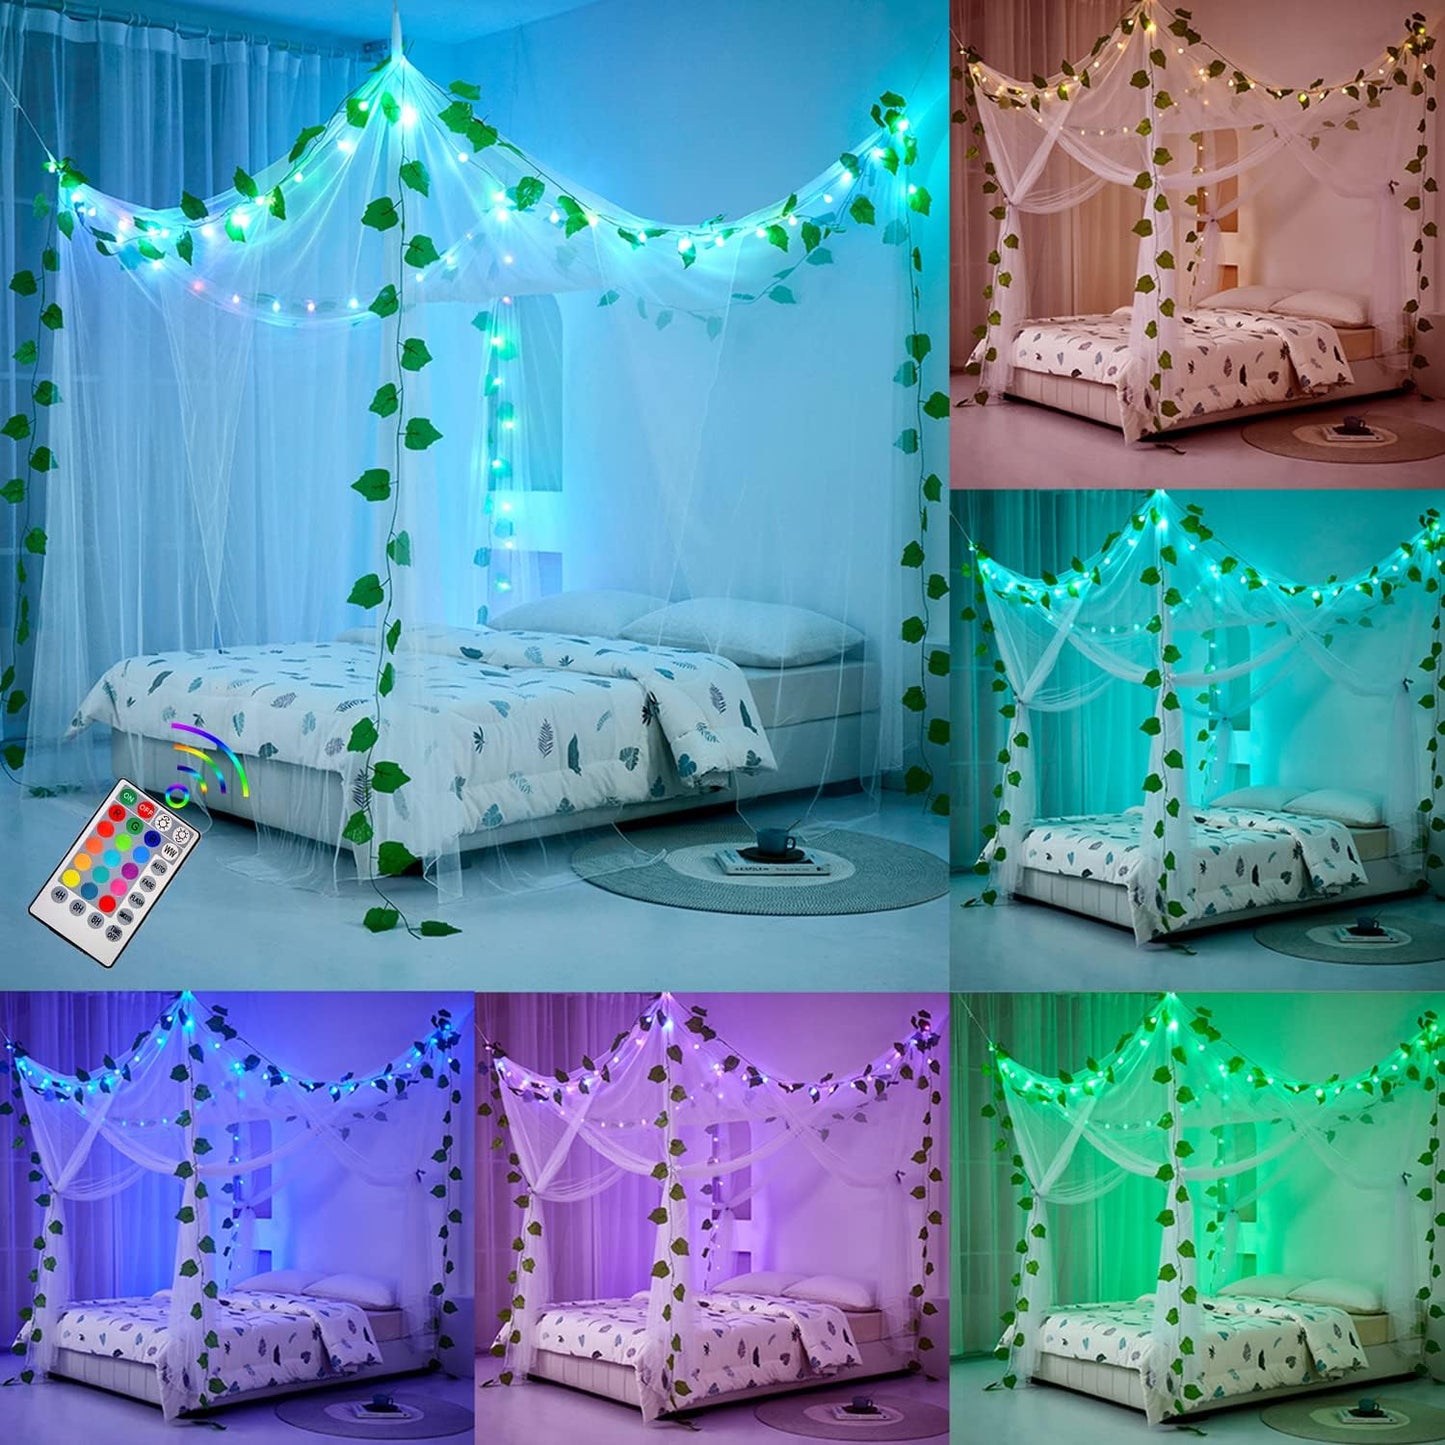 Akiky Princess Canopy Bed Curtains Bed Canopy Curtains with Lights for Queen Size Bed Drapes,8 Panels Canopies with 2 Lights,Room Décor (Full/Queen, White)  Akiky White-01 Queen/King 